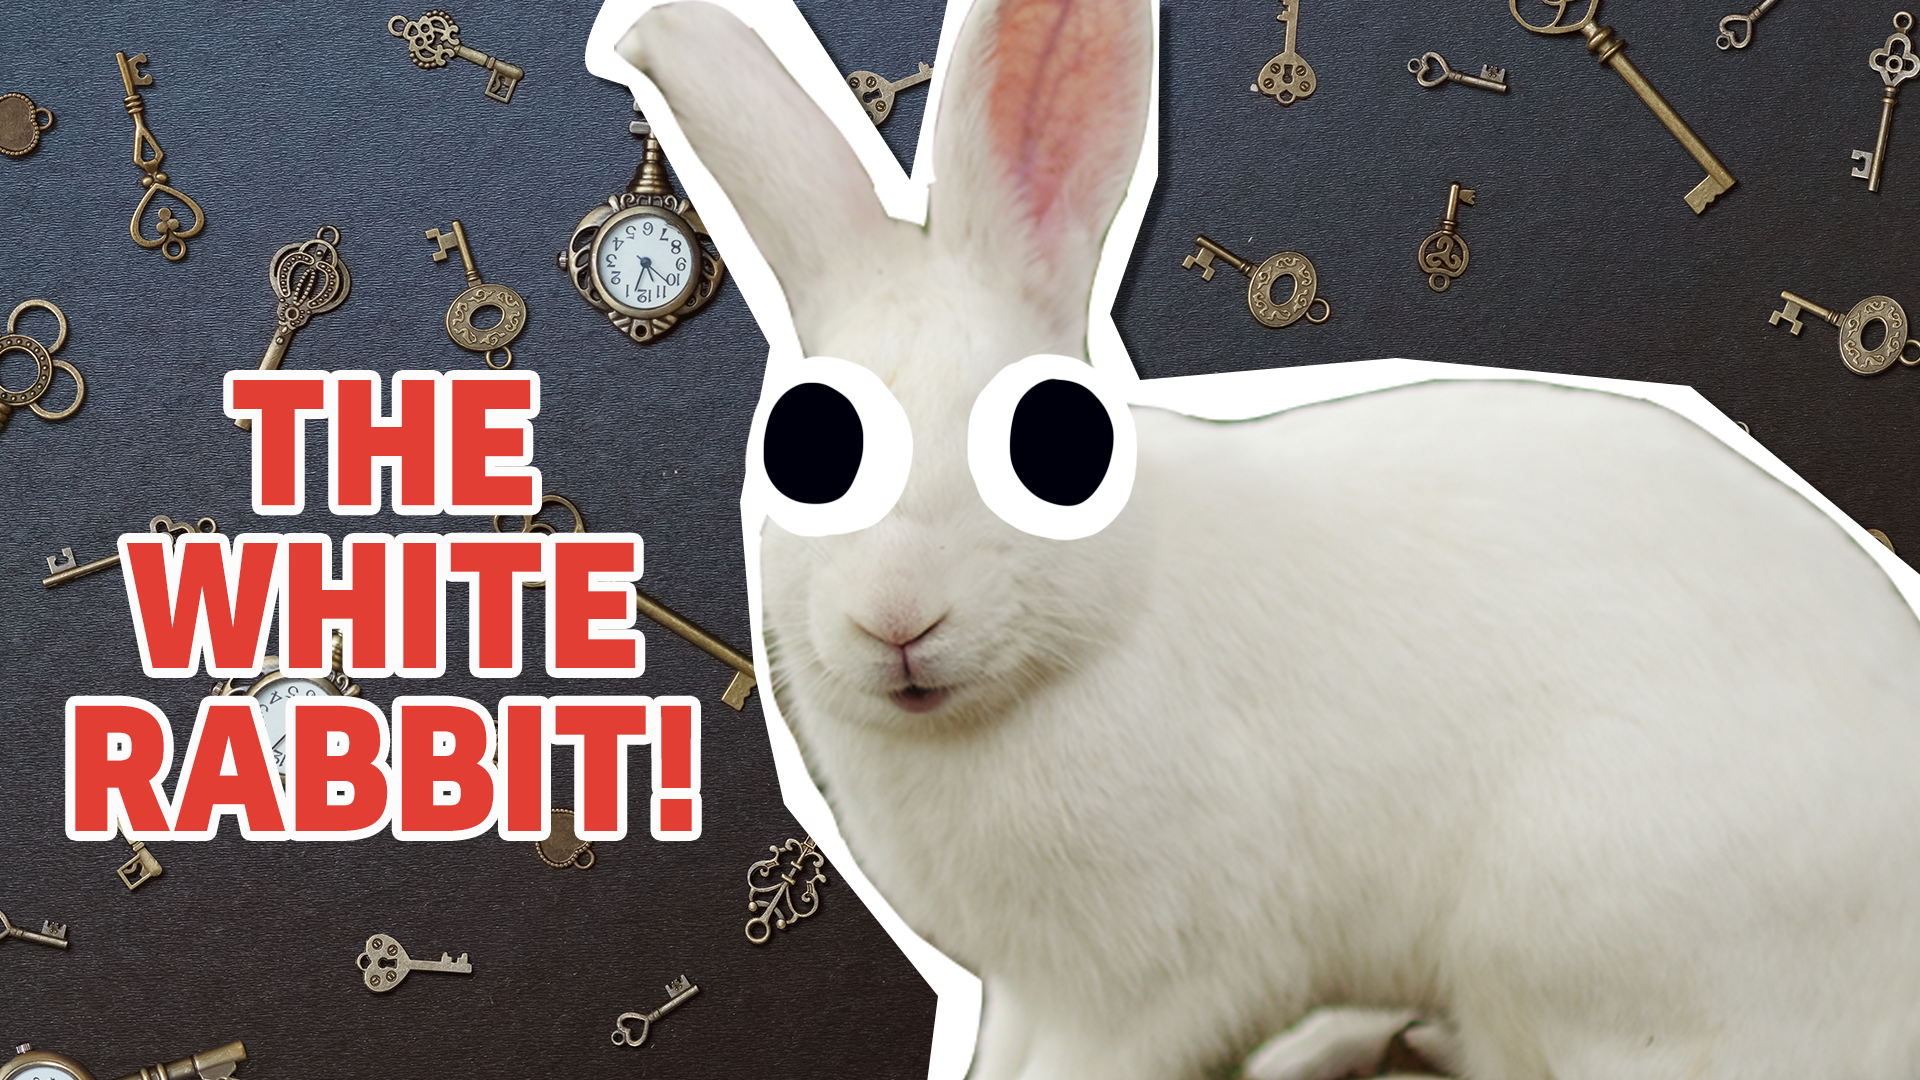 You're the White Rabbit! You're always in a rush, and you're never on time! You're easily panicked and life always stresses you out! Relax, it'll all work out!